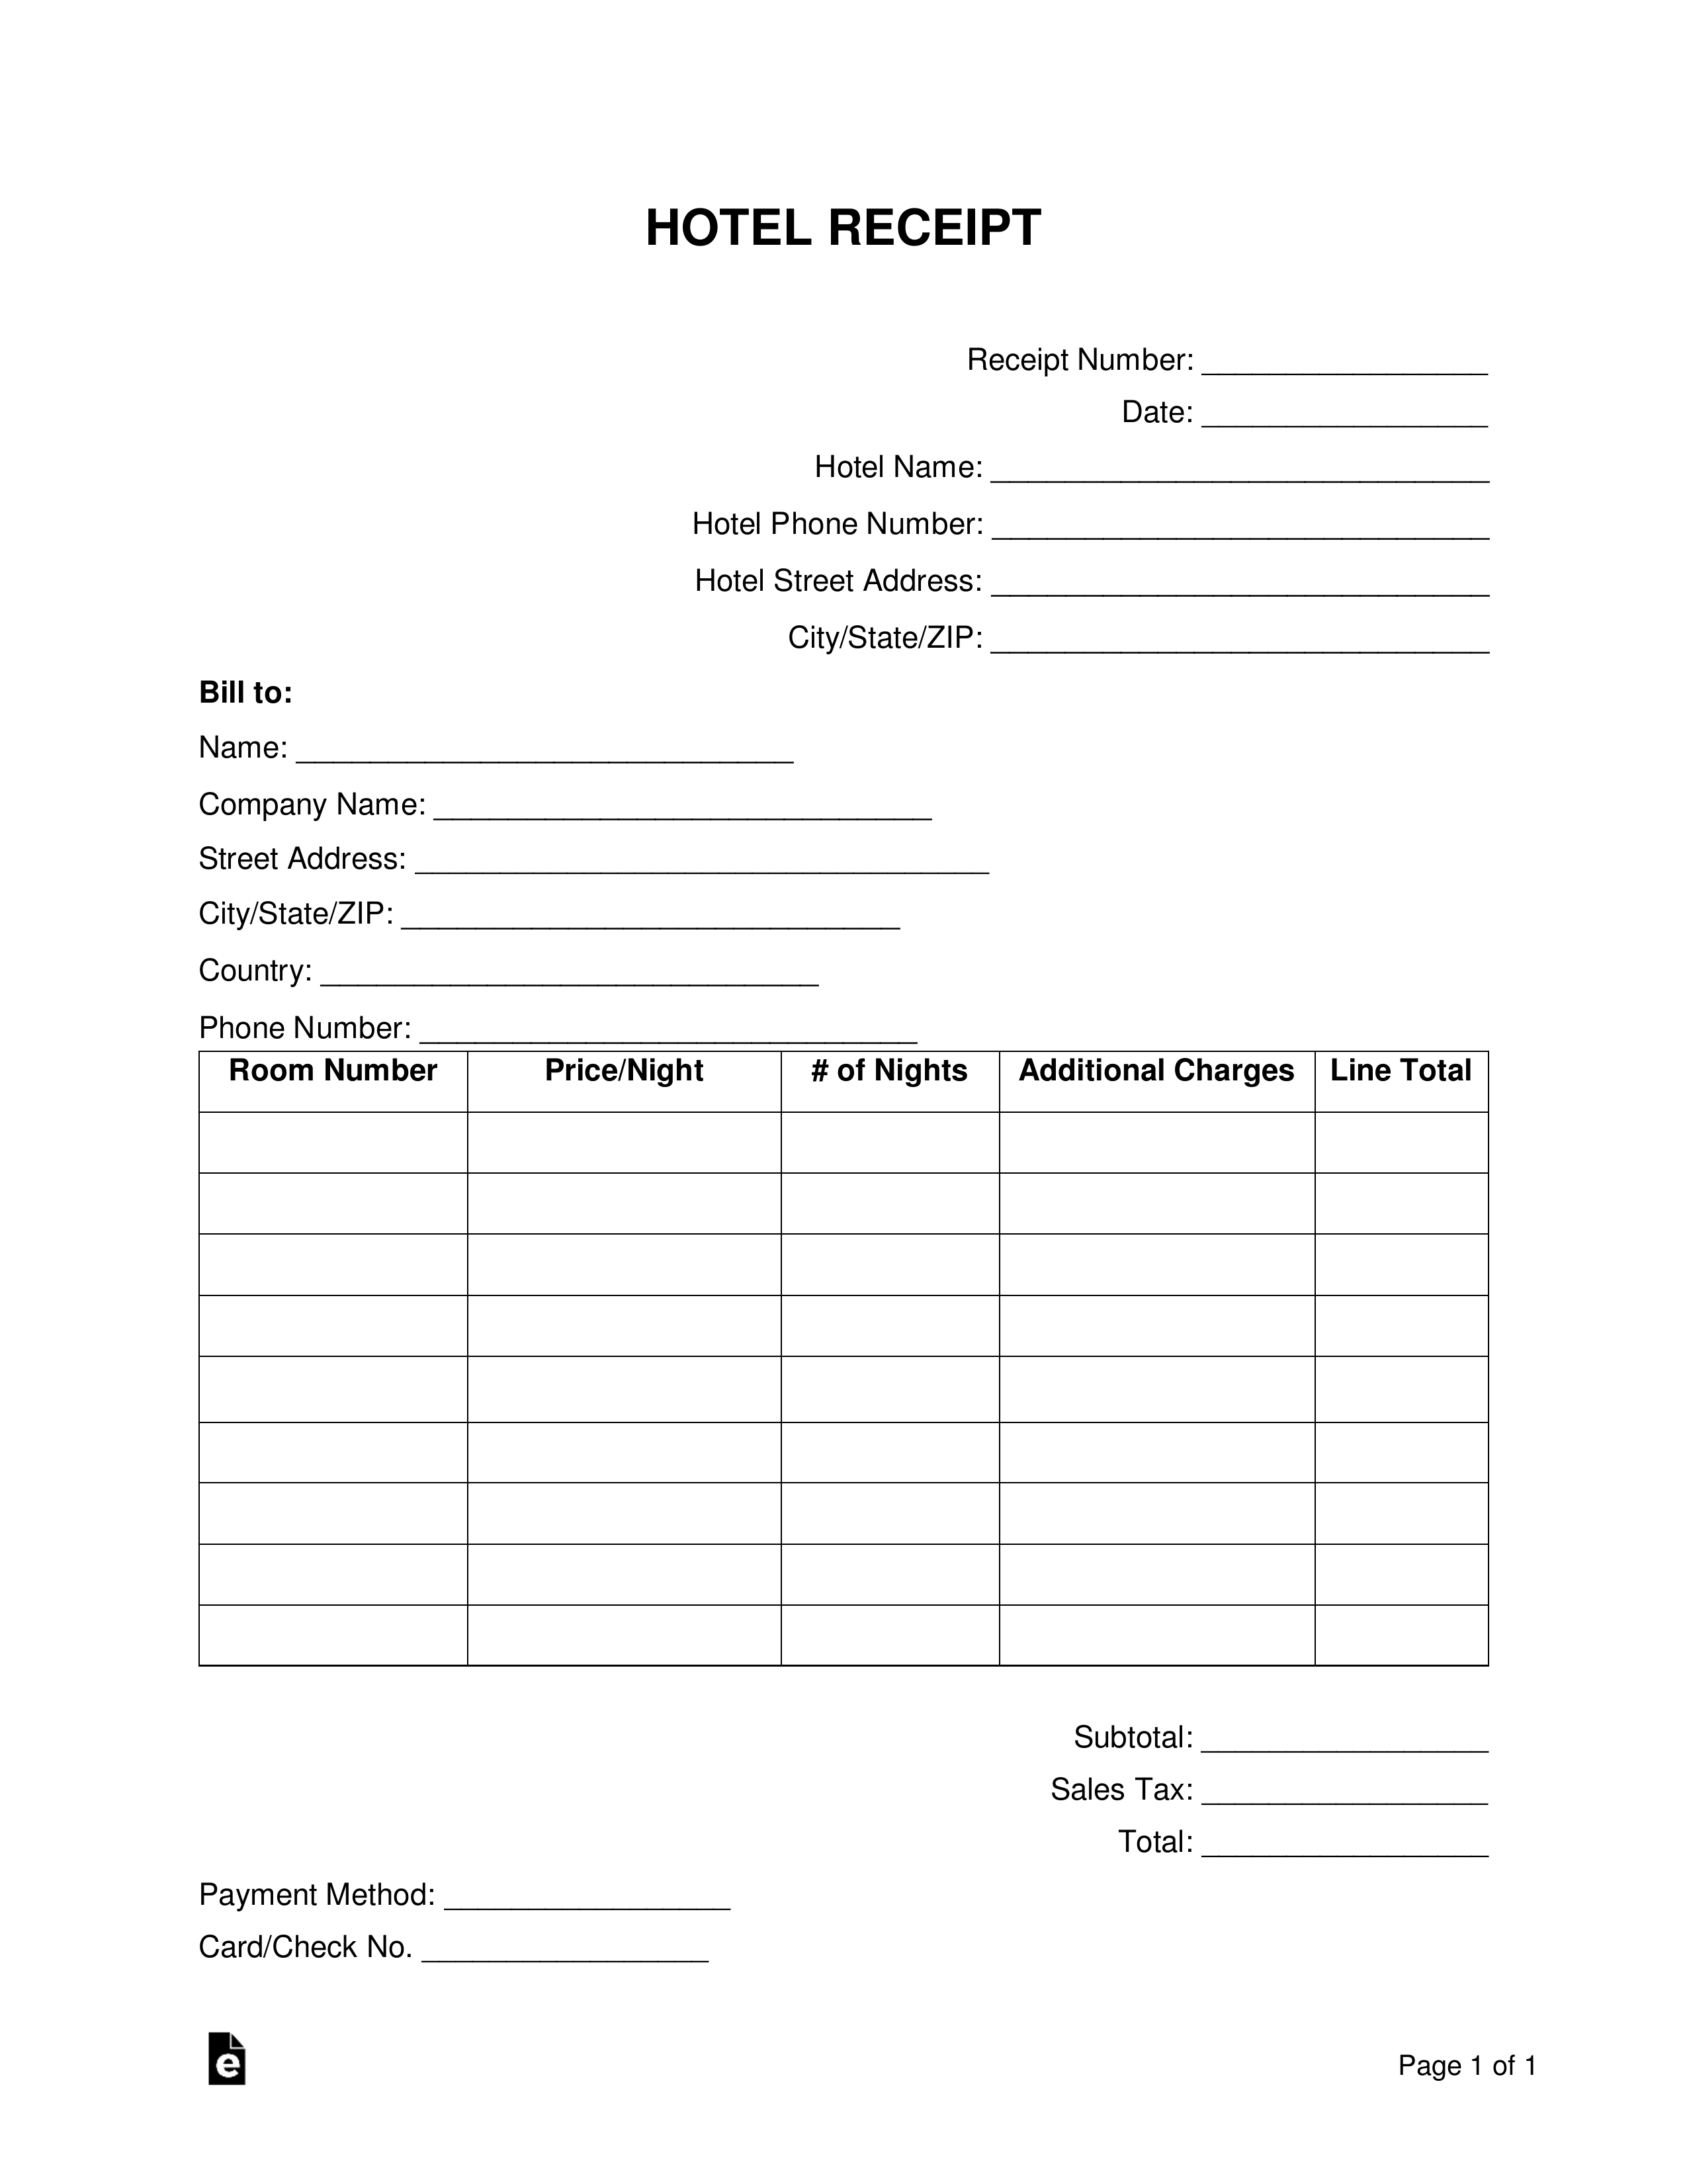 Expense Receipt Template For Hotel Simple Receipt Forms